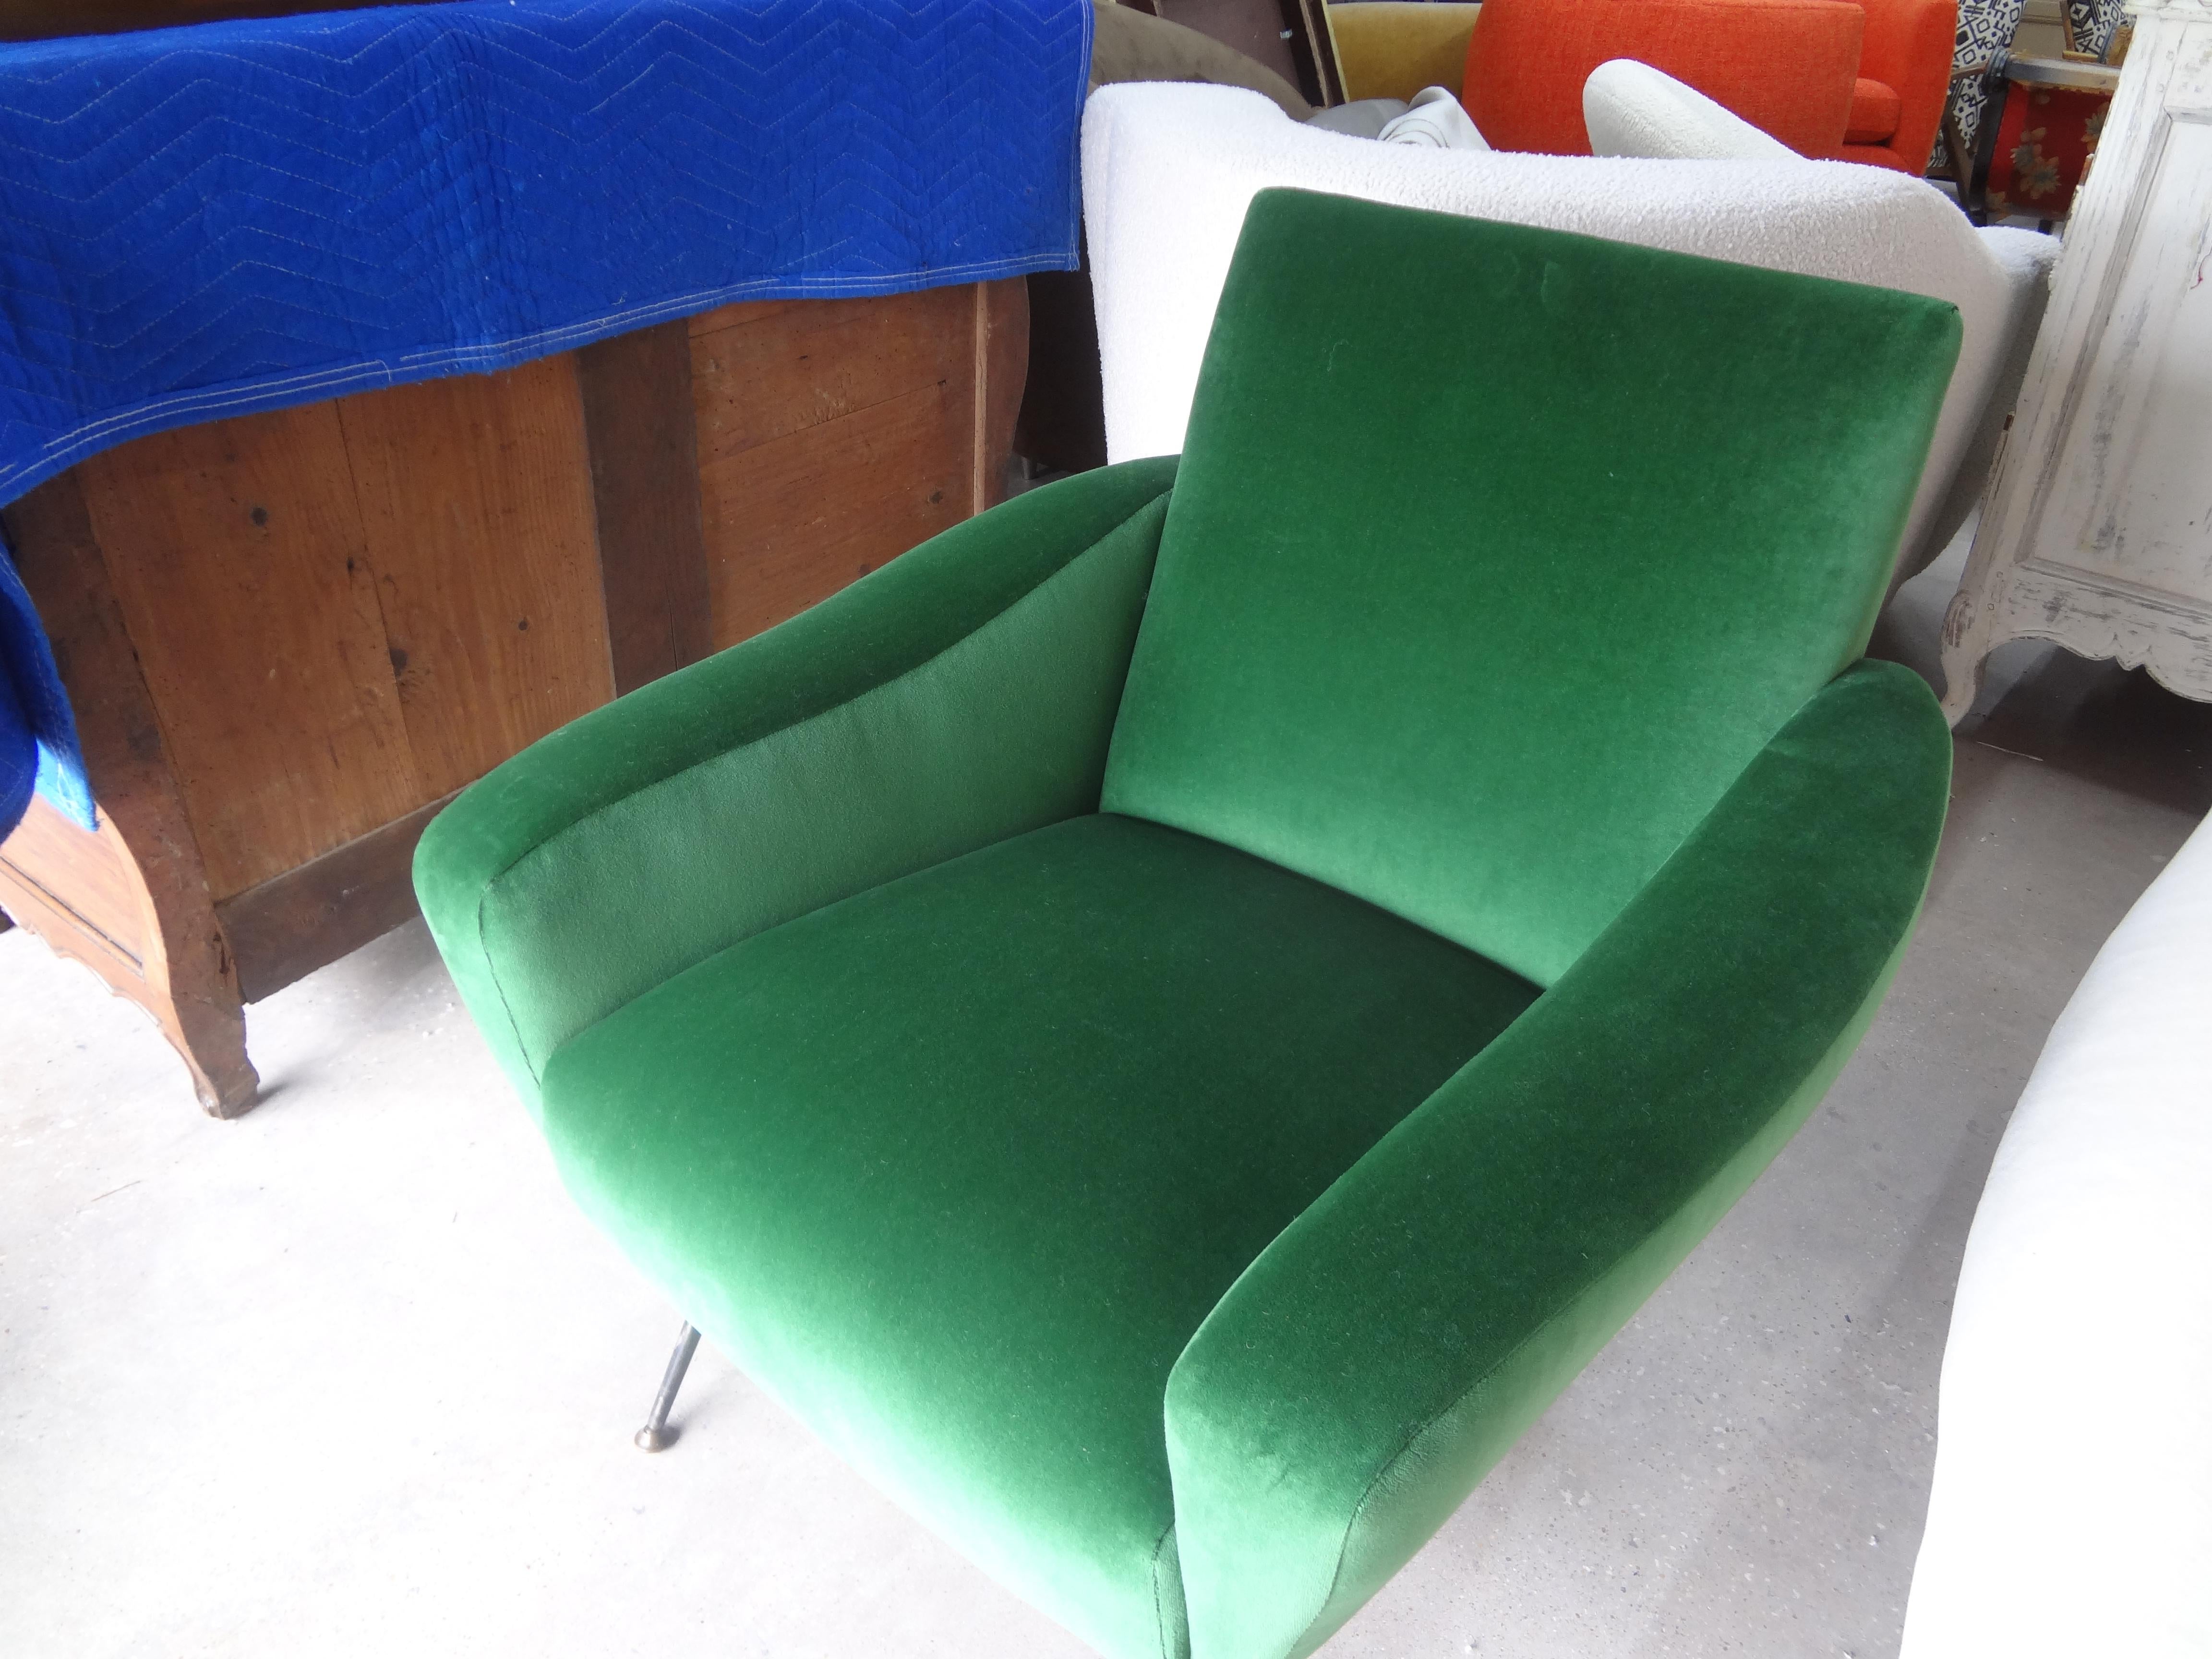 Italian sculptural lounge chair in the Manner of Gio Ponti.
Great sculptural Italian lounge chair after Gio Ponti, Marco Zanuso, Gigi Radice or Paolo Buffa. This beautiful Italian lounge chair, club chair or side chair is professionally upholstered